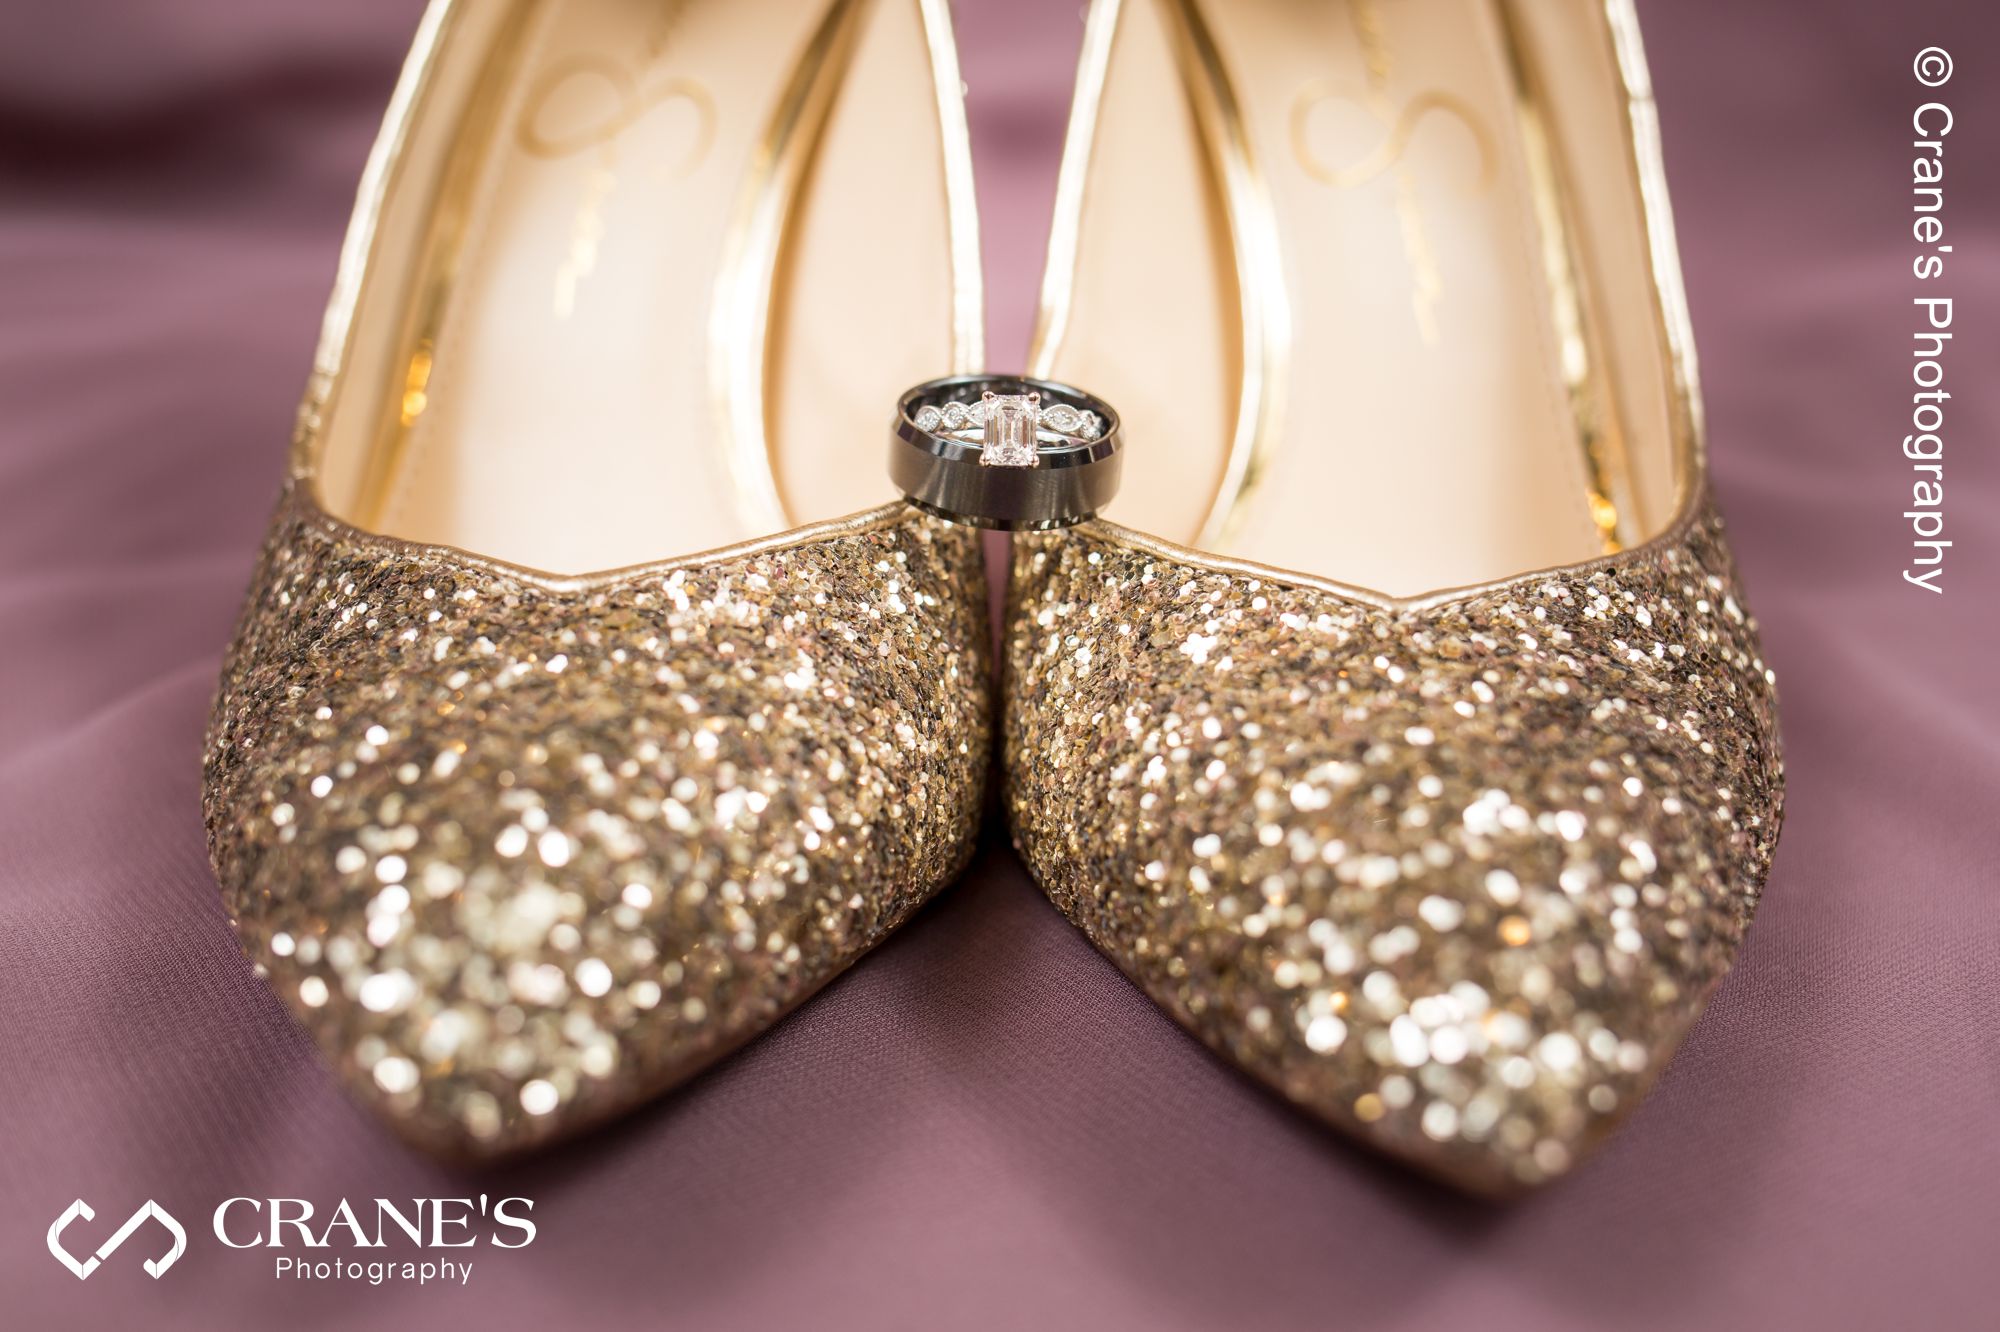 Wedding bands and glittery gold bride's shoes styled image